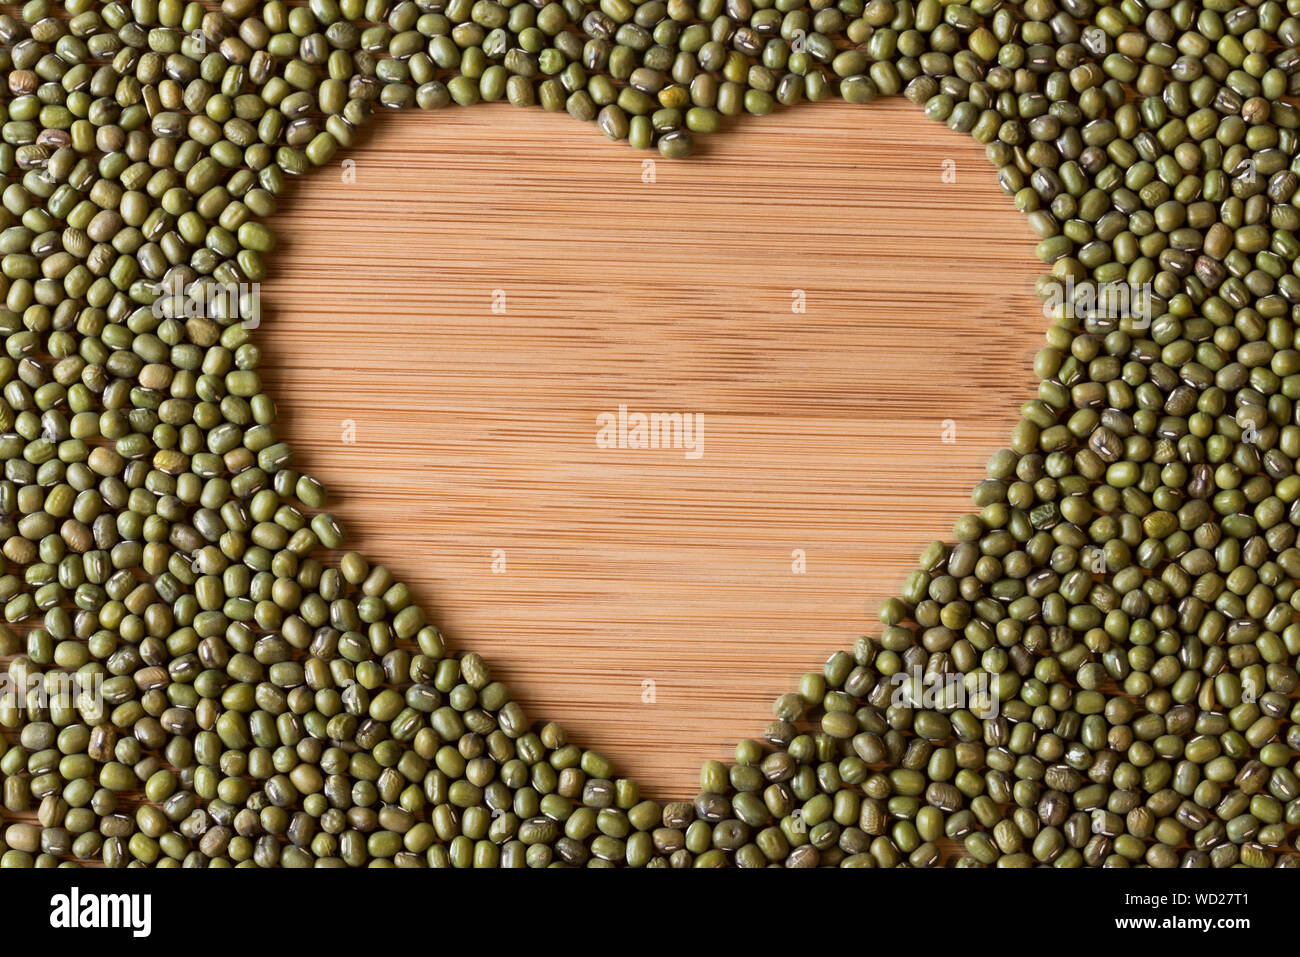 Directly Above View Of Mung Beans Arranged As Heart Shape On Wooden Table Stock Photo